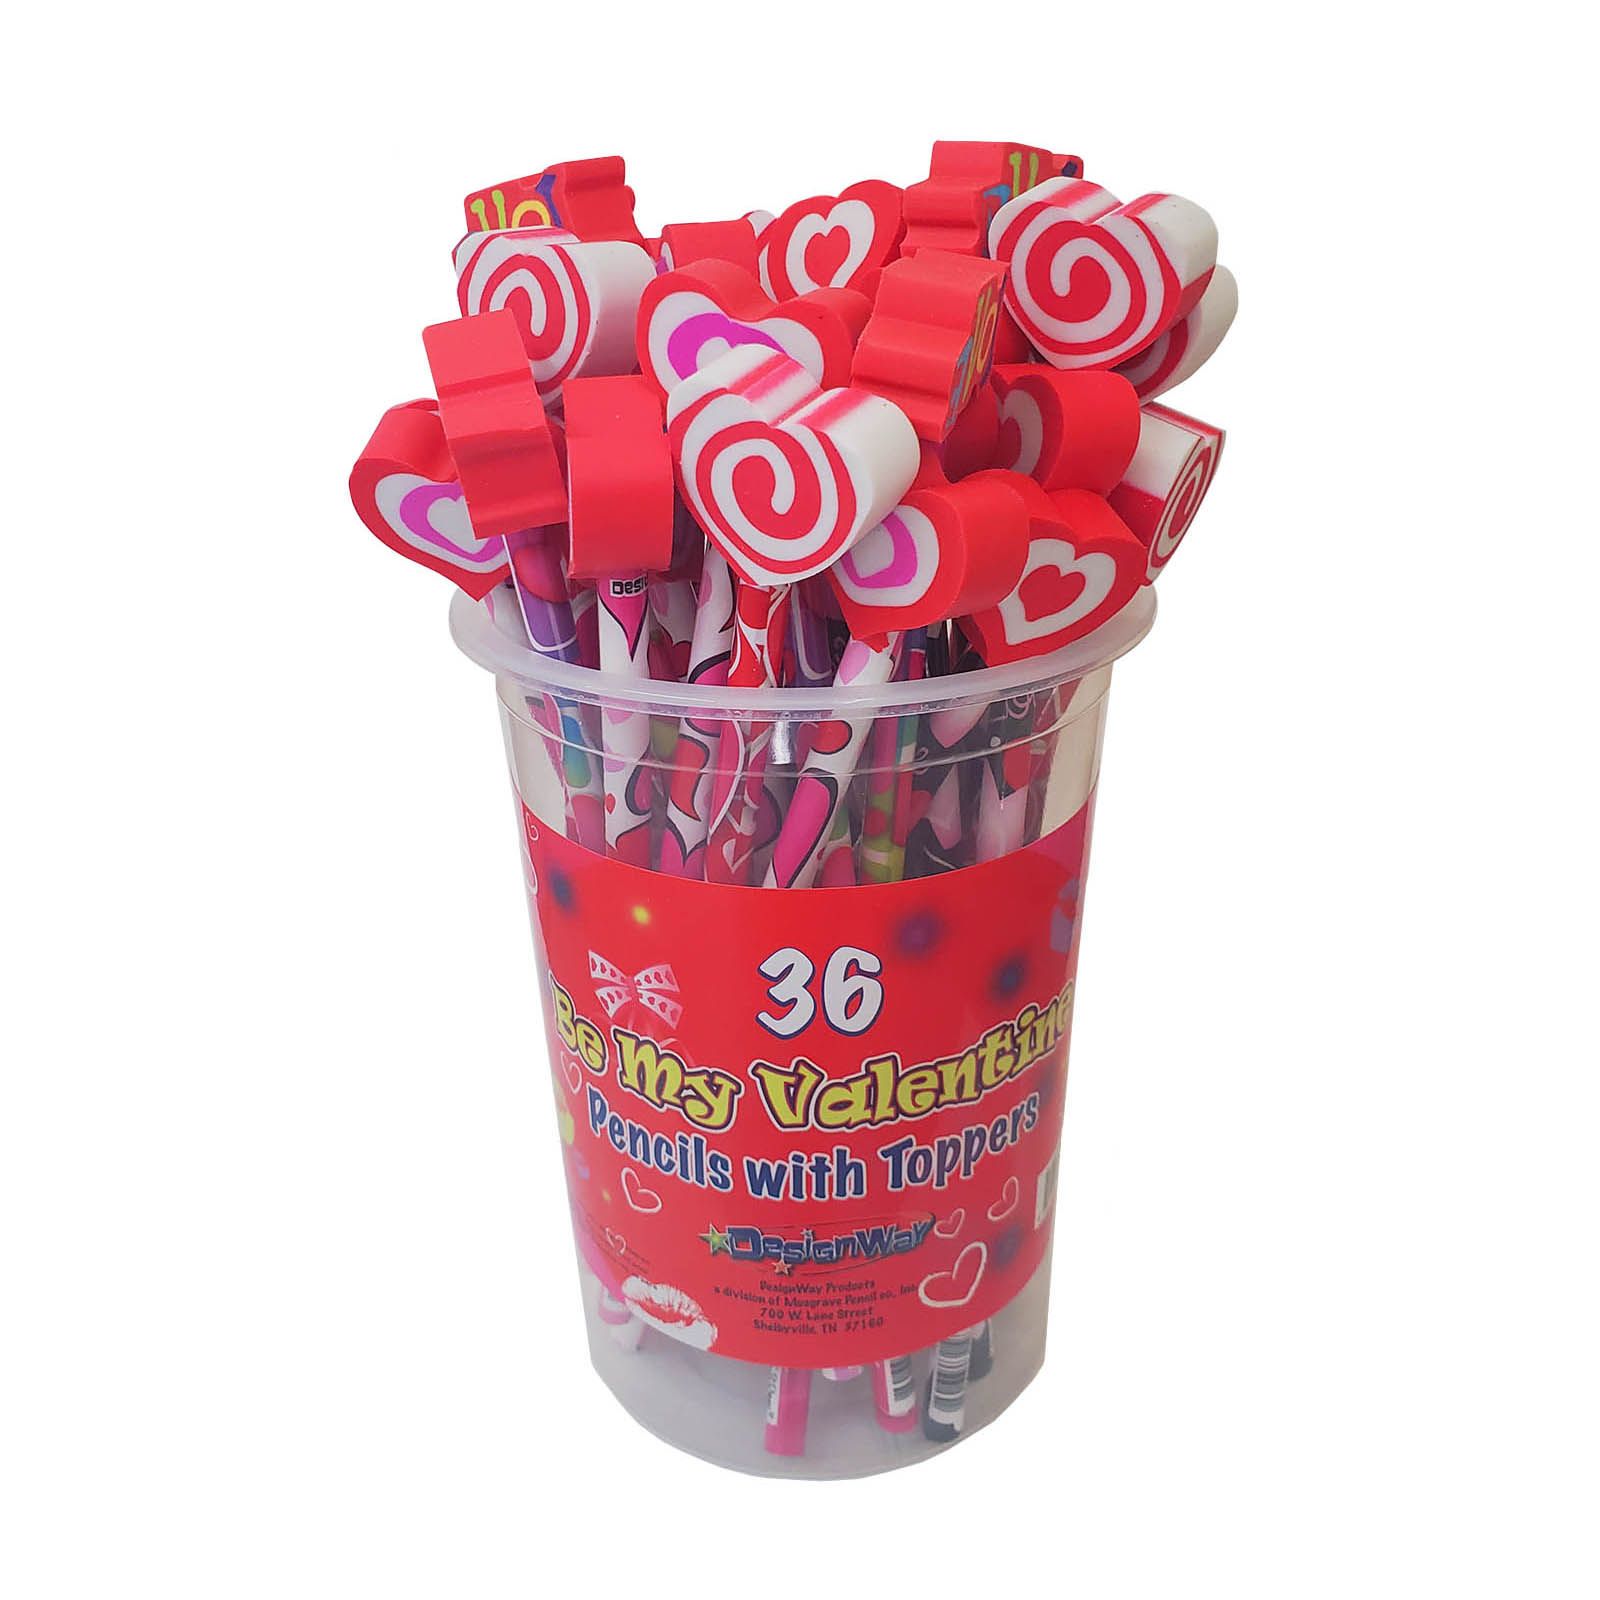 Valentine's Day Pencils by Made by Lilli Clipart